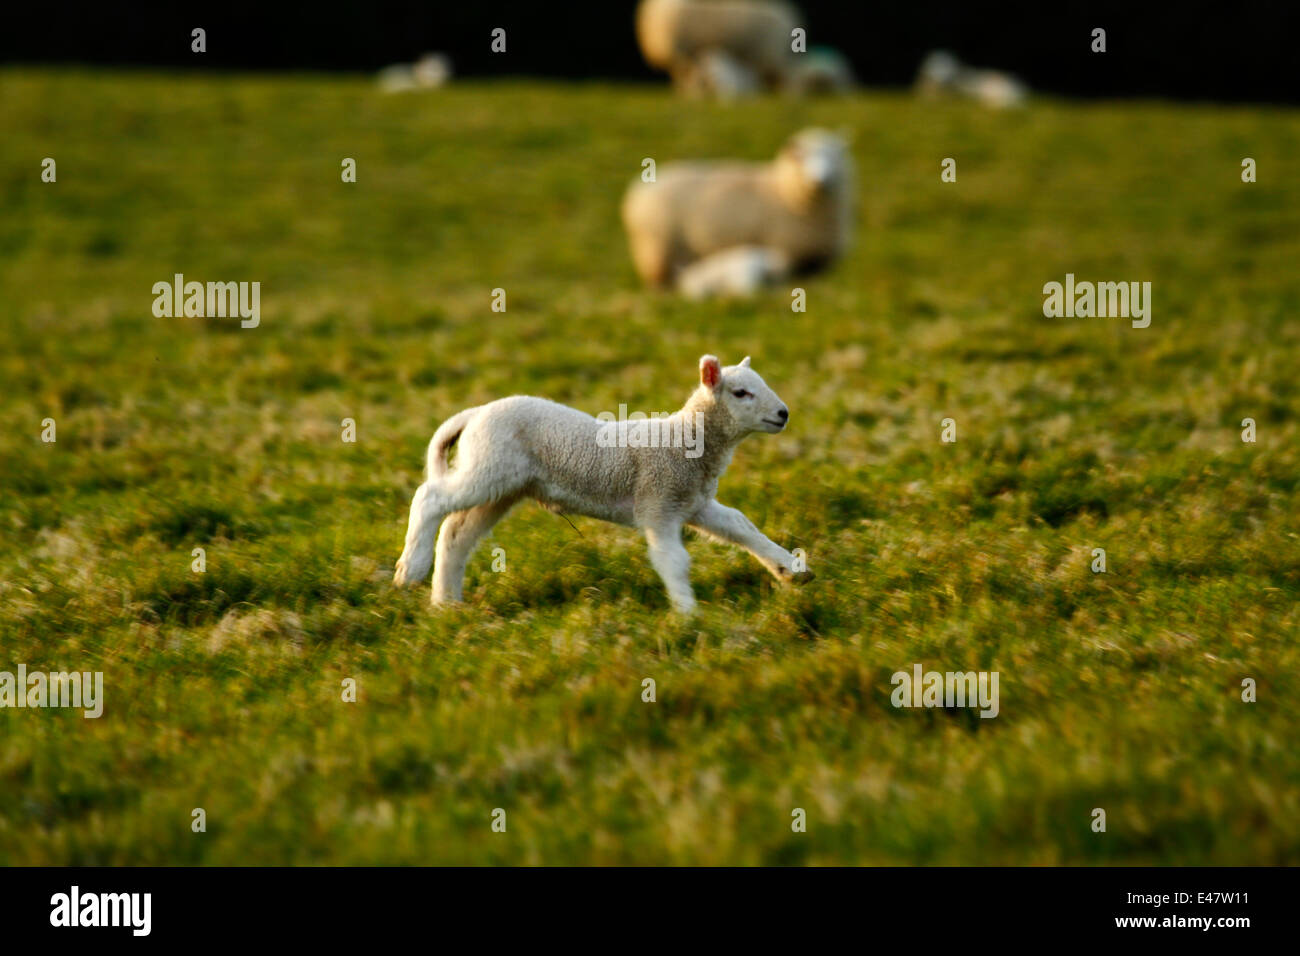 Farmed Spring Lamb playing running with the joy of spring amid a flock of sheep in the field Stock Photo